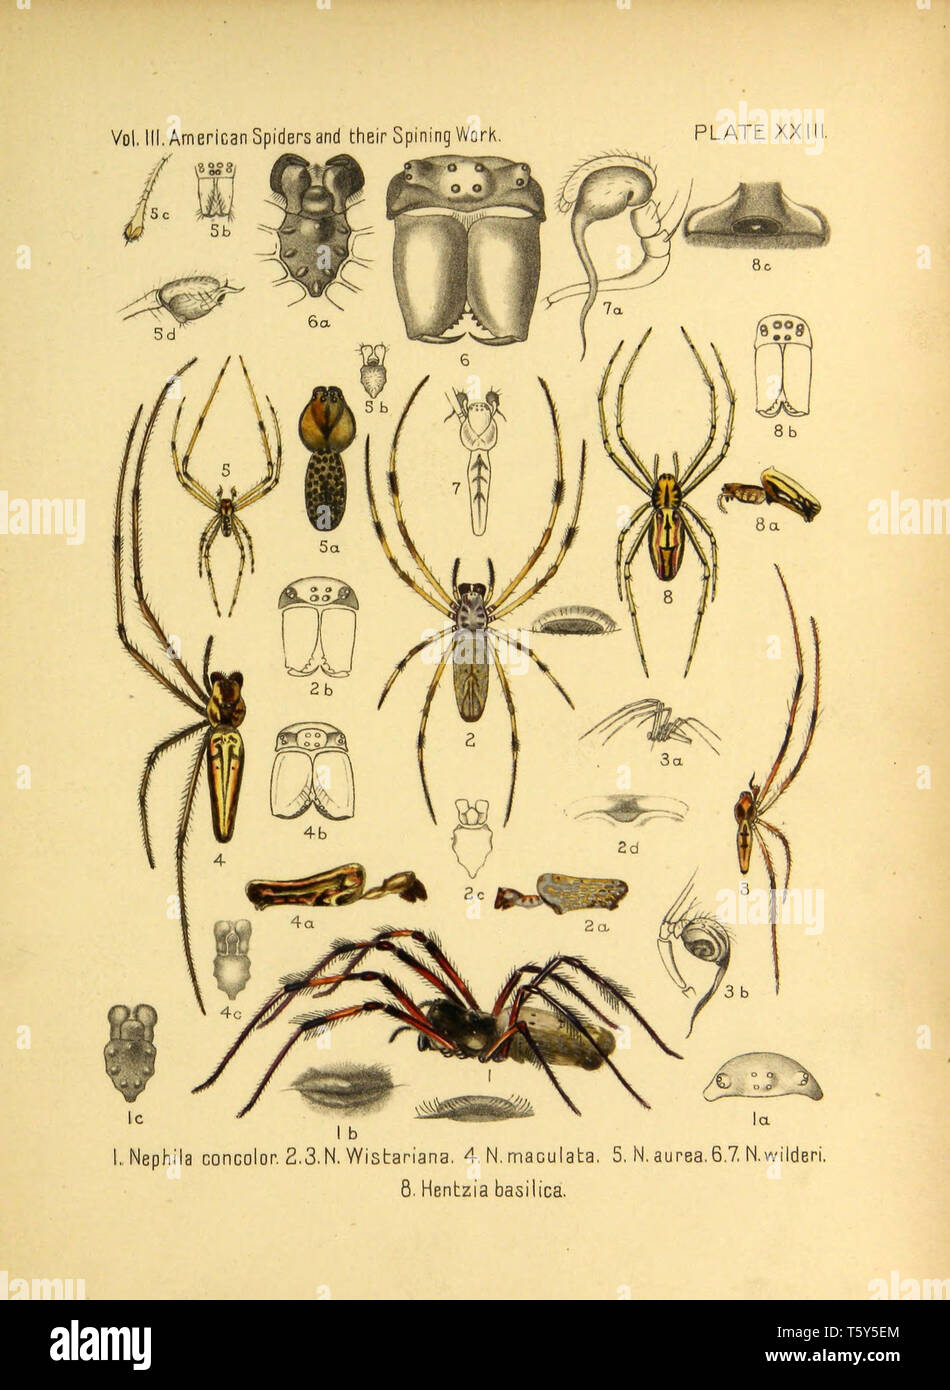 Beautiful vintage hand drawn illustrations of exotic spiders from old book. It can be used as poster or decorative element for interior design. Stock Photo